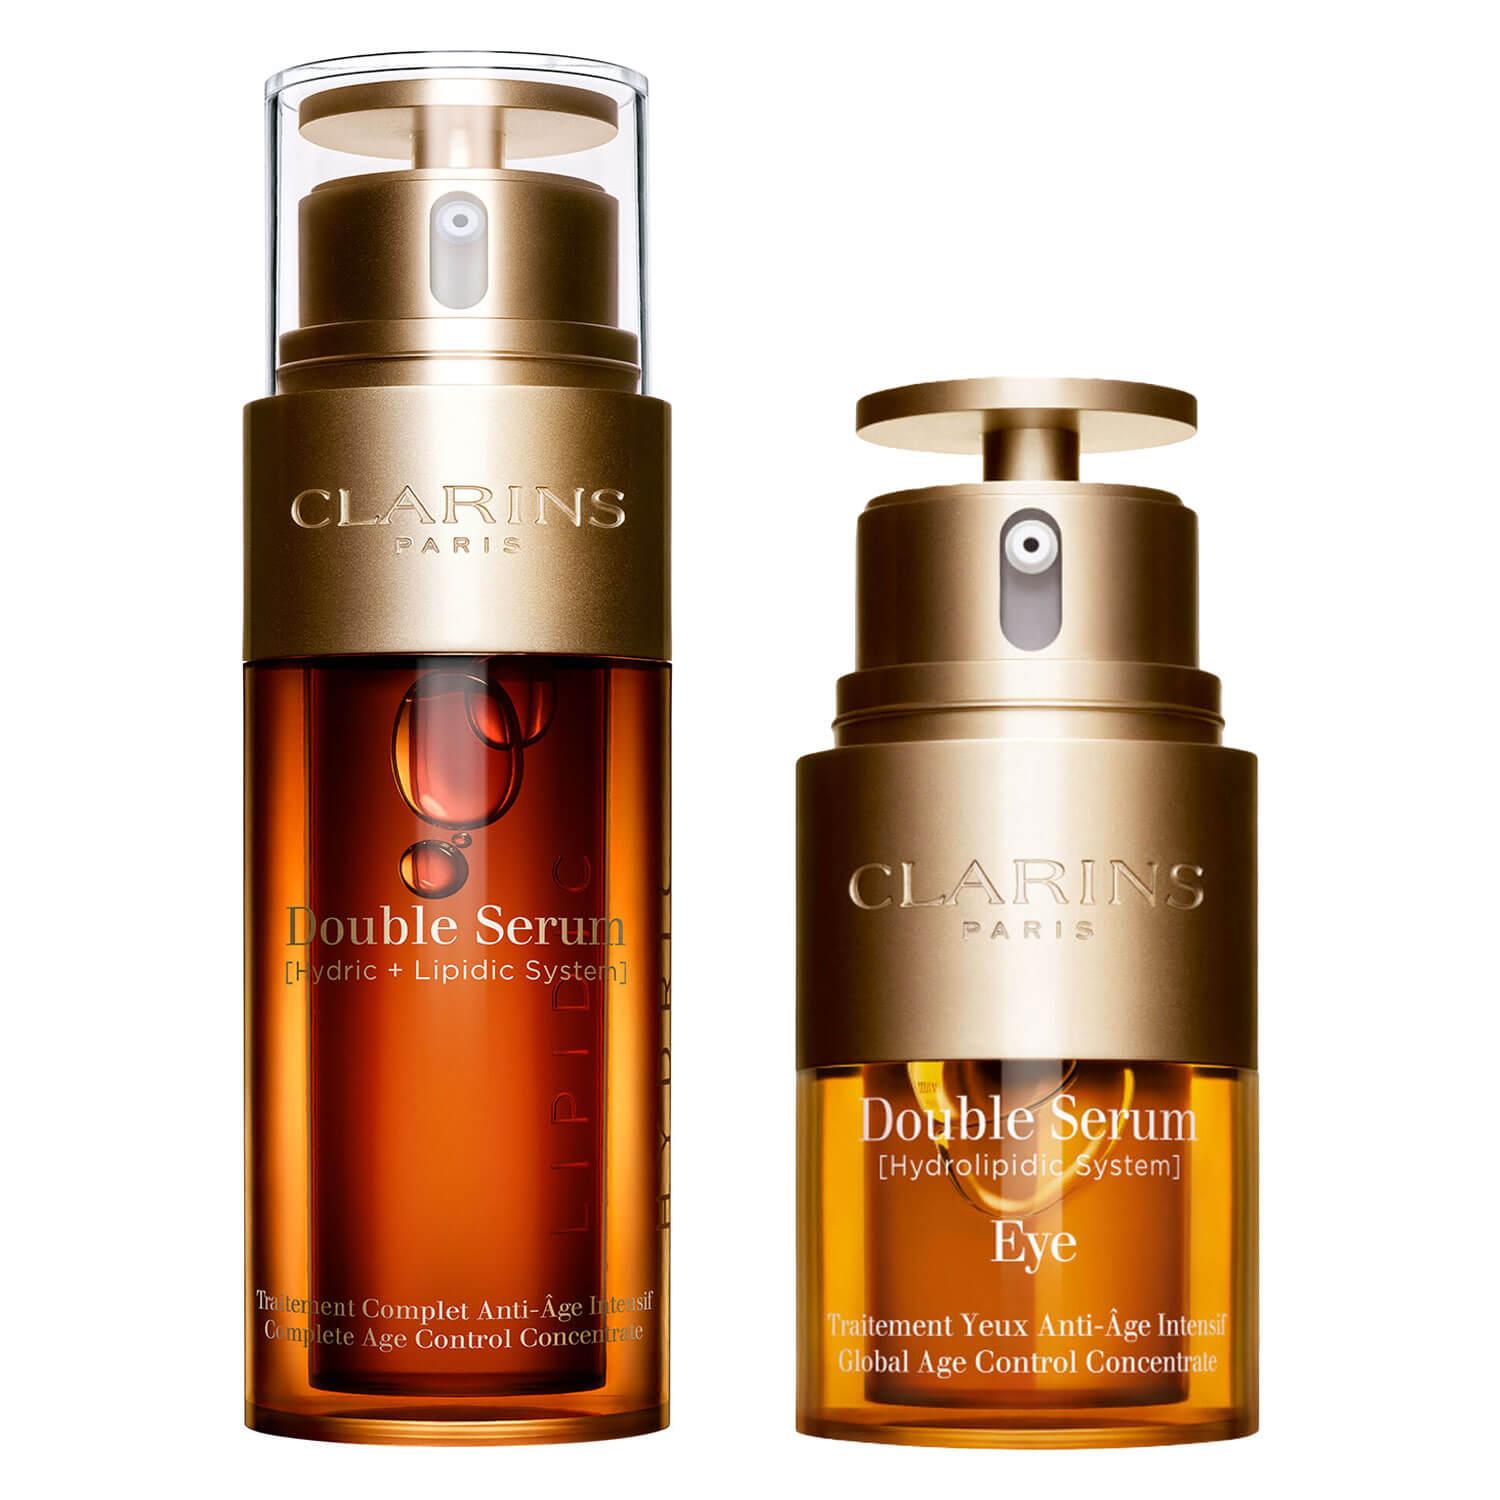 Clarins Specials - The Double Power Duo